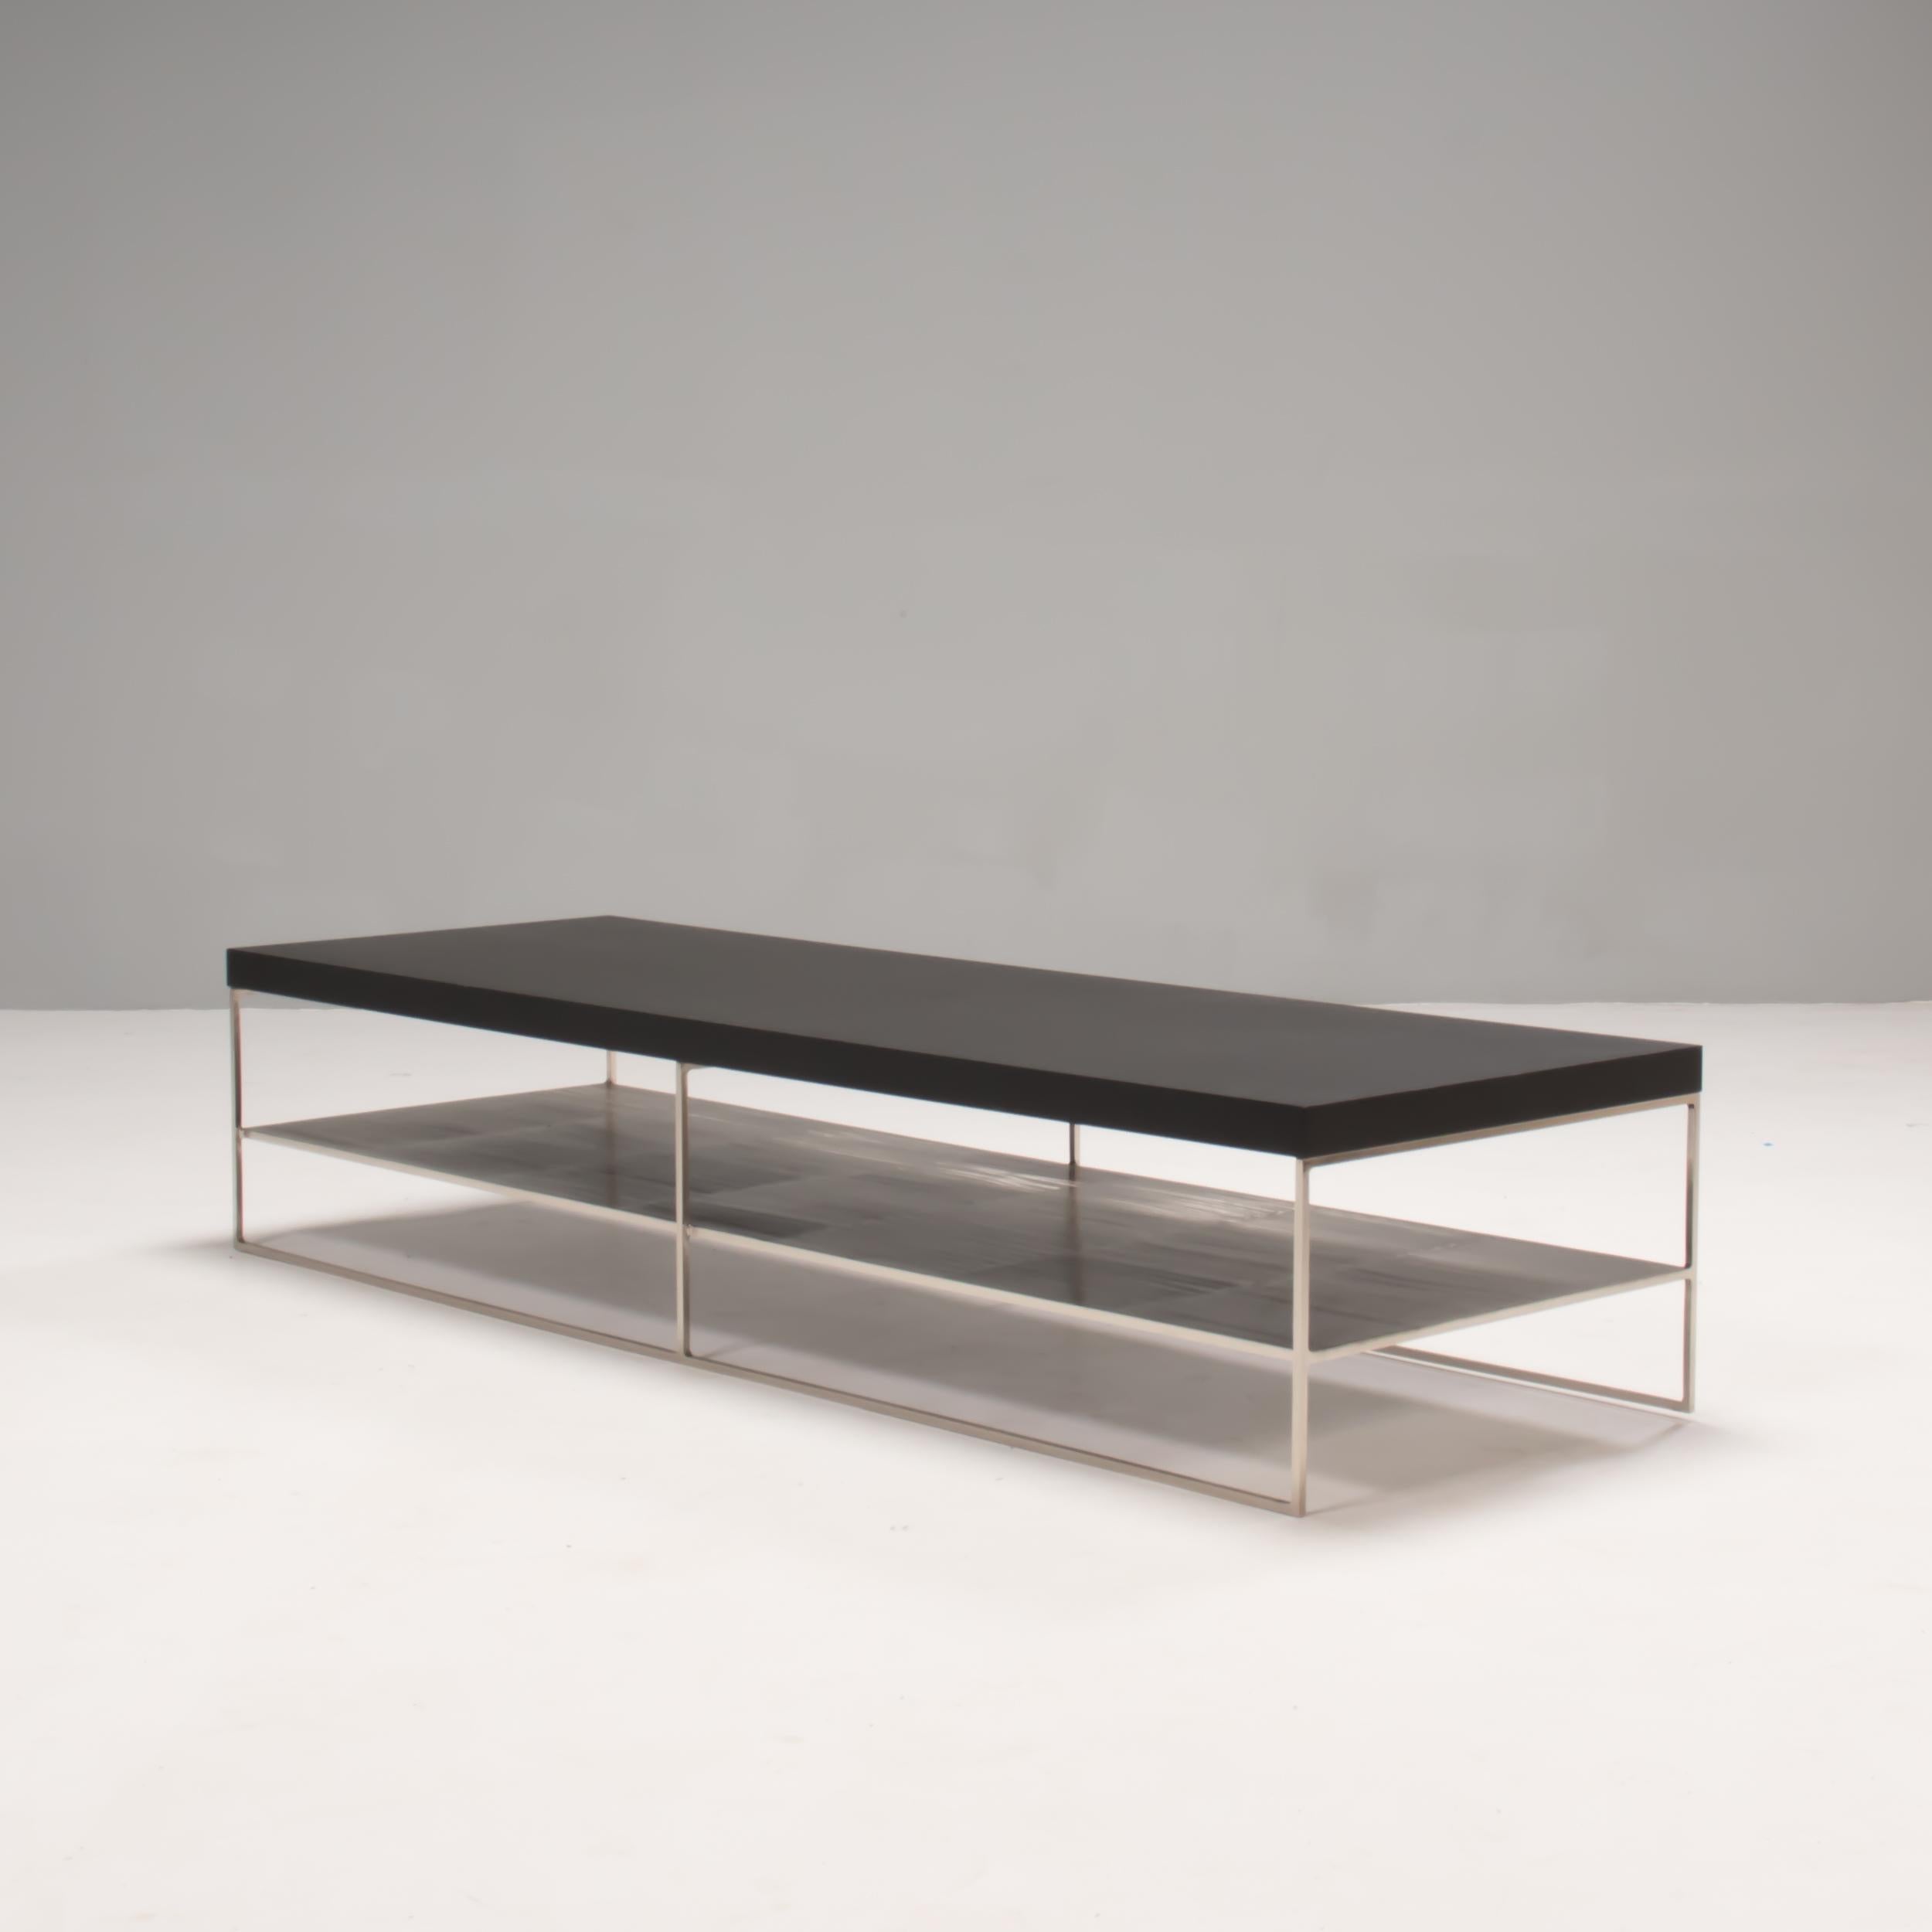 Designed by Rodolfo Dordoni for Minotti, the Liam coffee table formed part of the 2020 Collection which embodies contemporary Italian design.

Constructed from a 1cm square steel frame with a pewter finish, the coffee table has a slimline